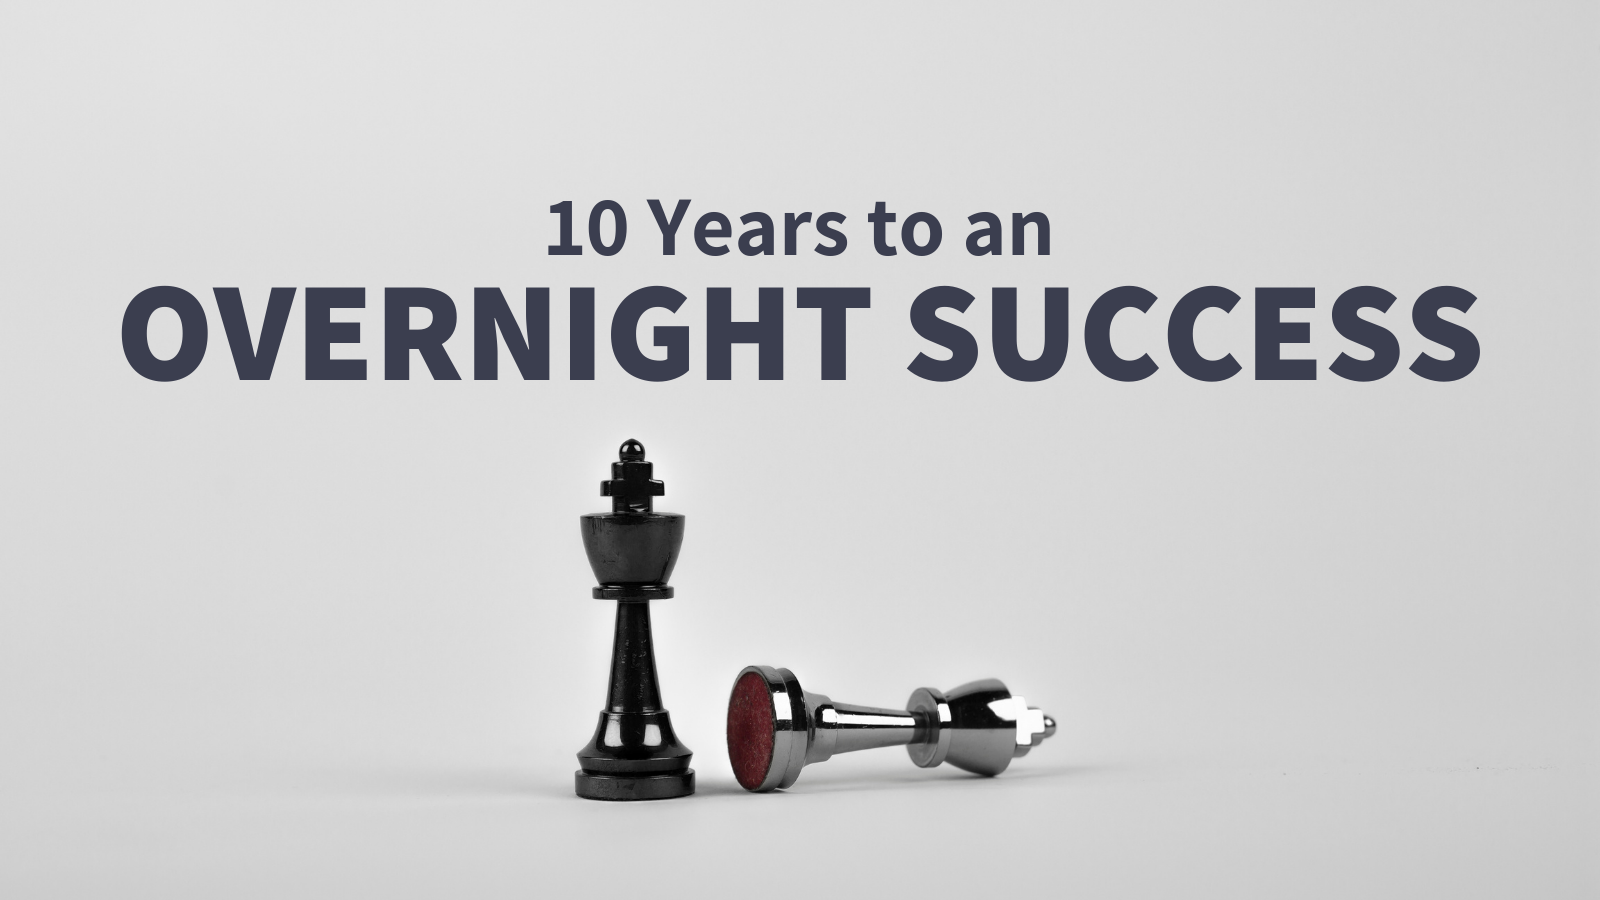 10 Years of Indie Hacking to an Overnight Success